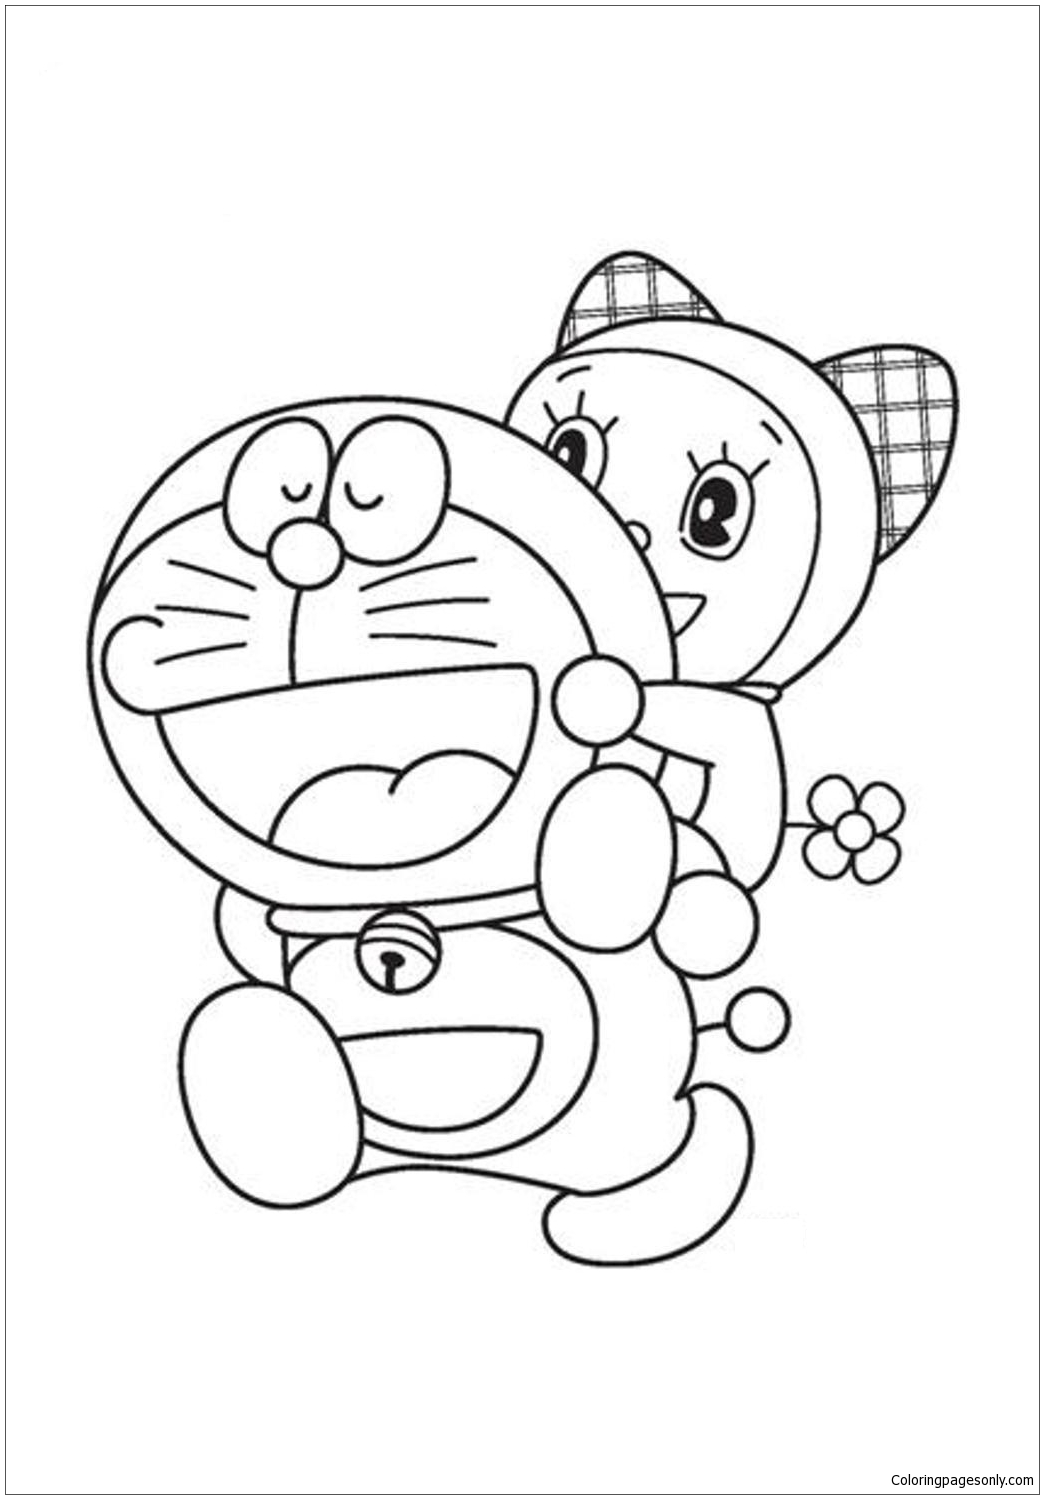 Doraemon And Dorami Coloring Pages